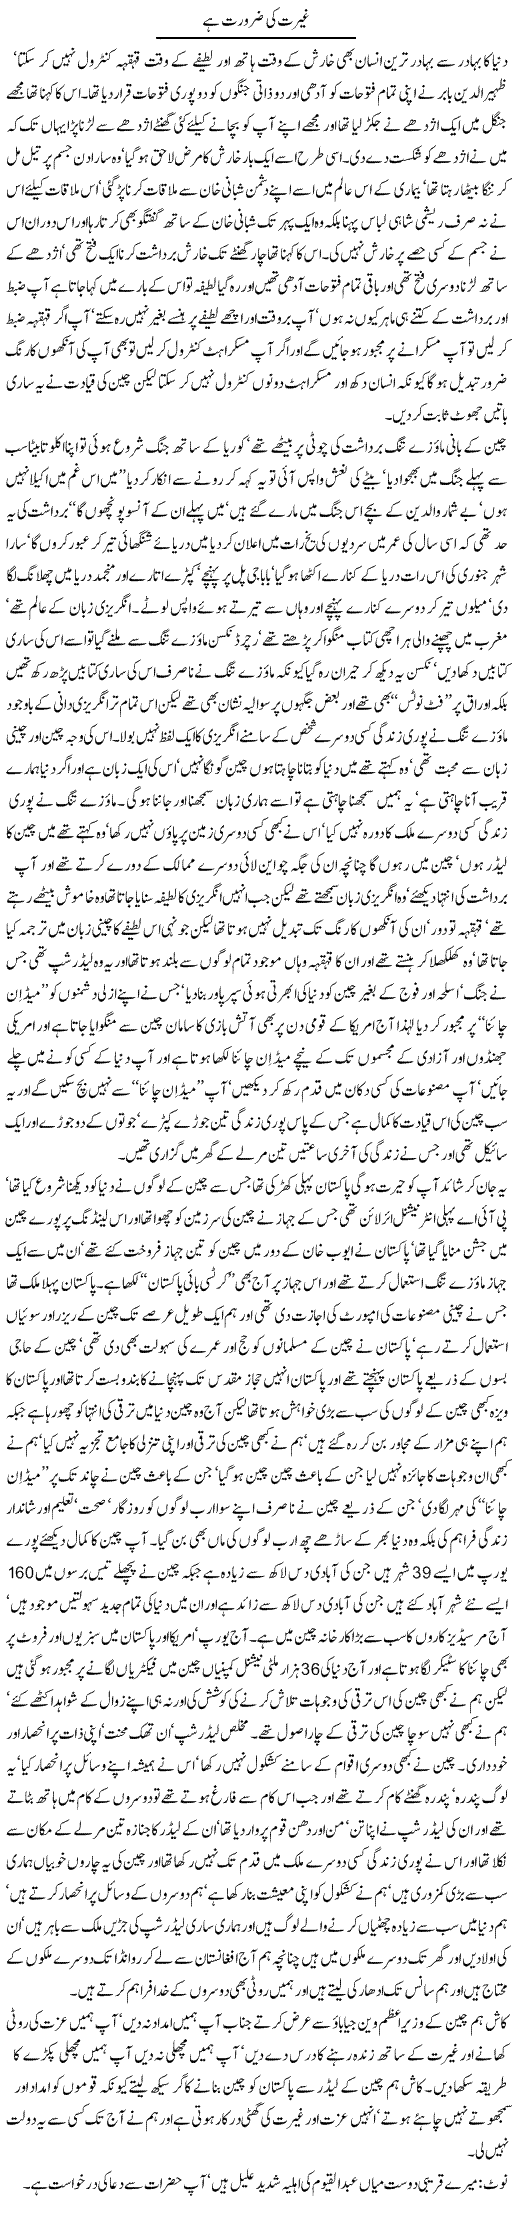 Need of Dignity Express Column Javed Chaudhry 21 December 2010